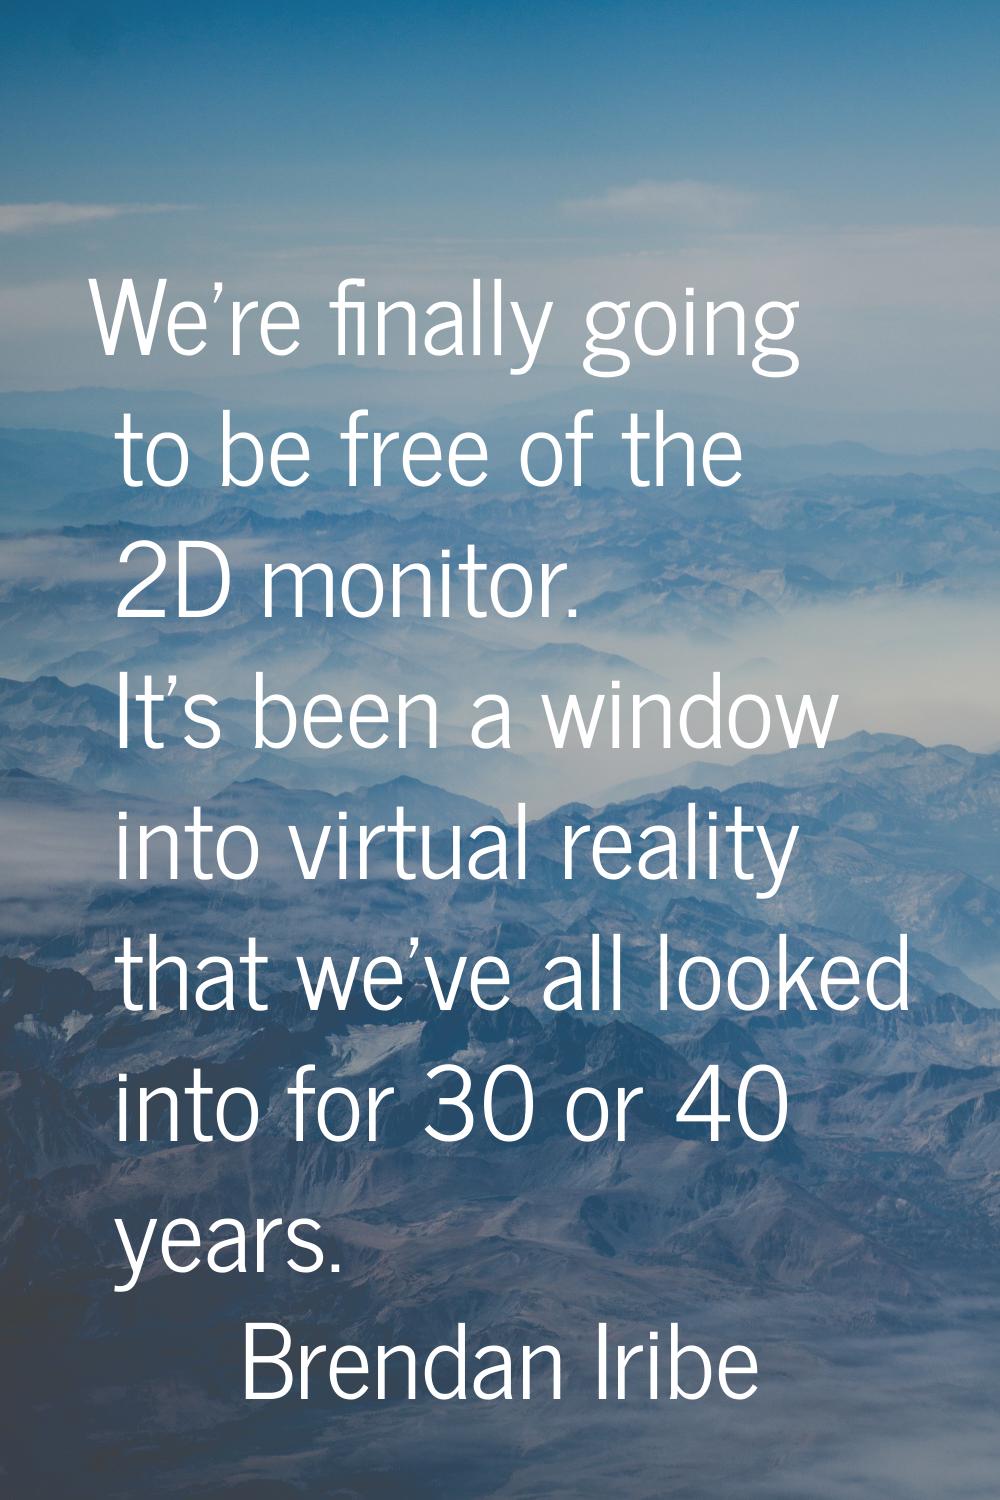 We're finally going to be free of the 2D monitor. It's been a window into virtual reality that we'v